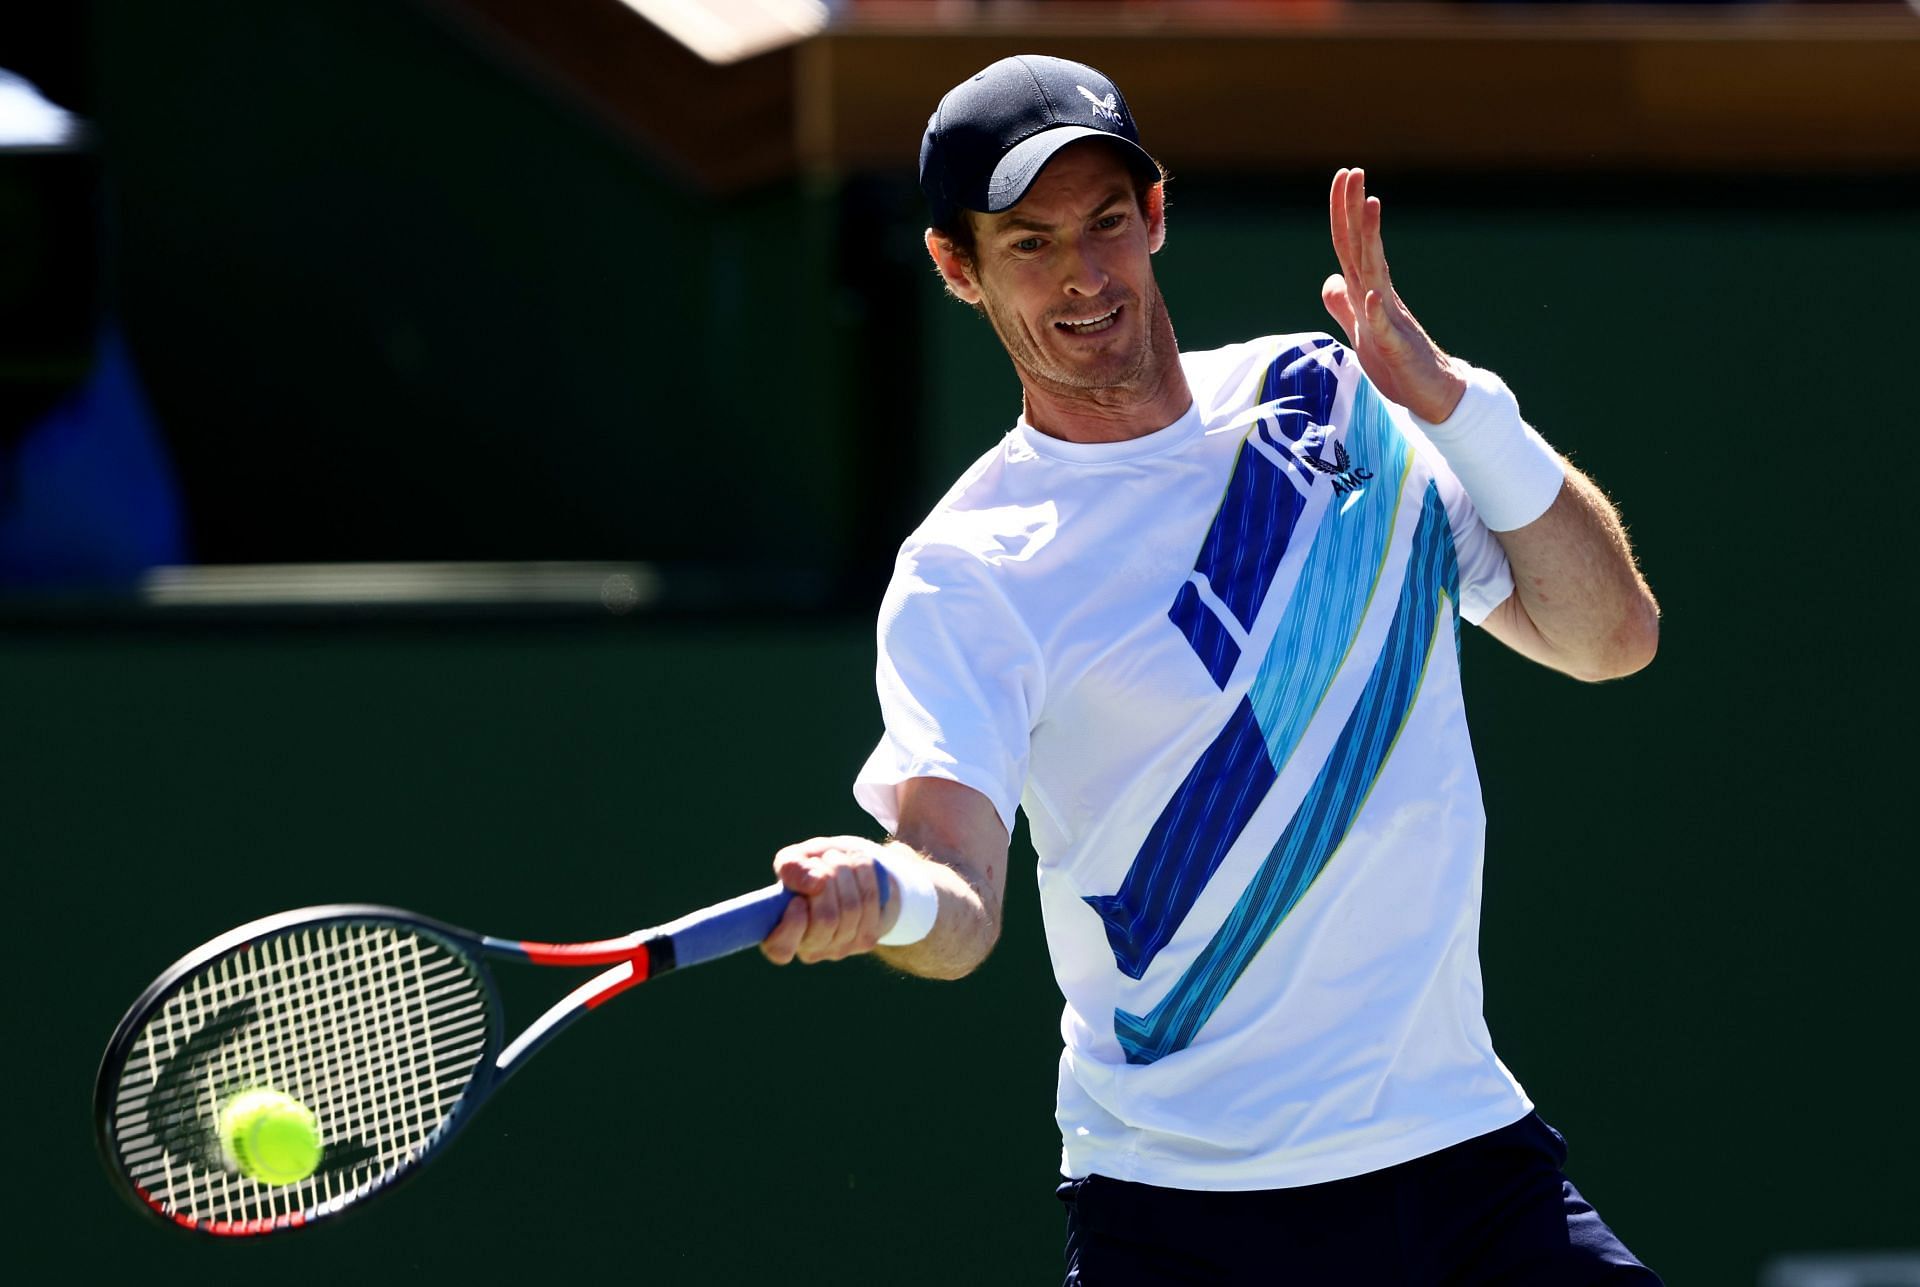 Andy Murray will be looking to reach the third round of the Indian Wells Masters